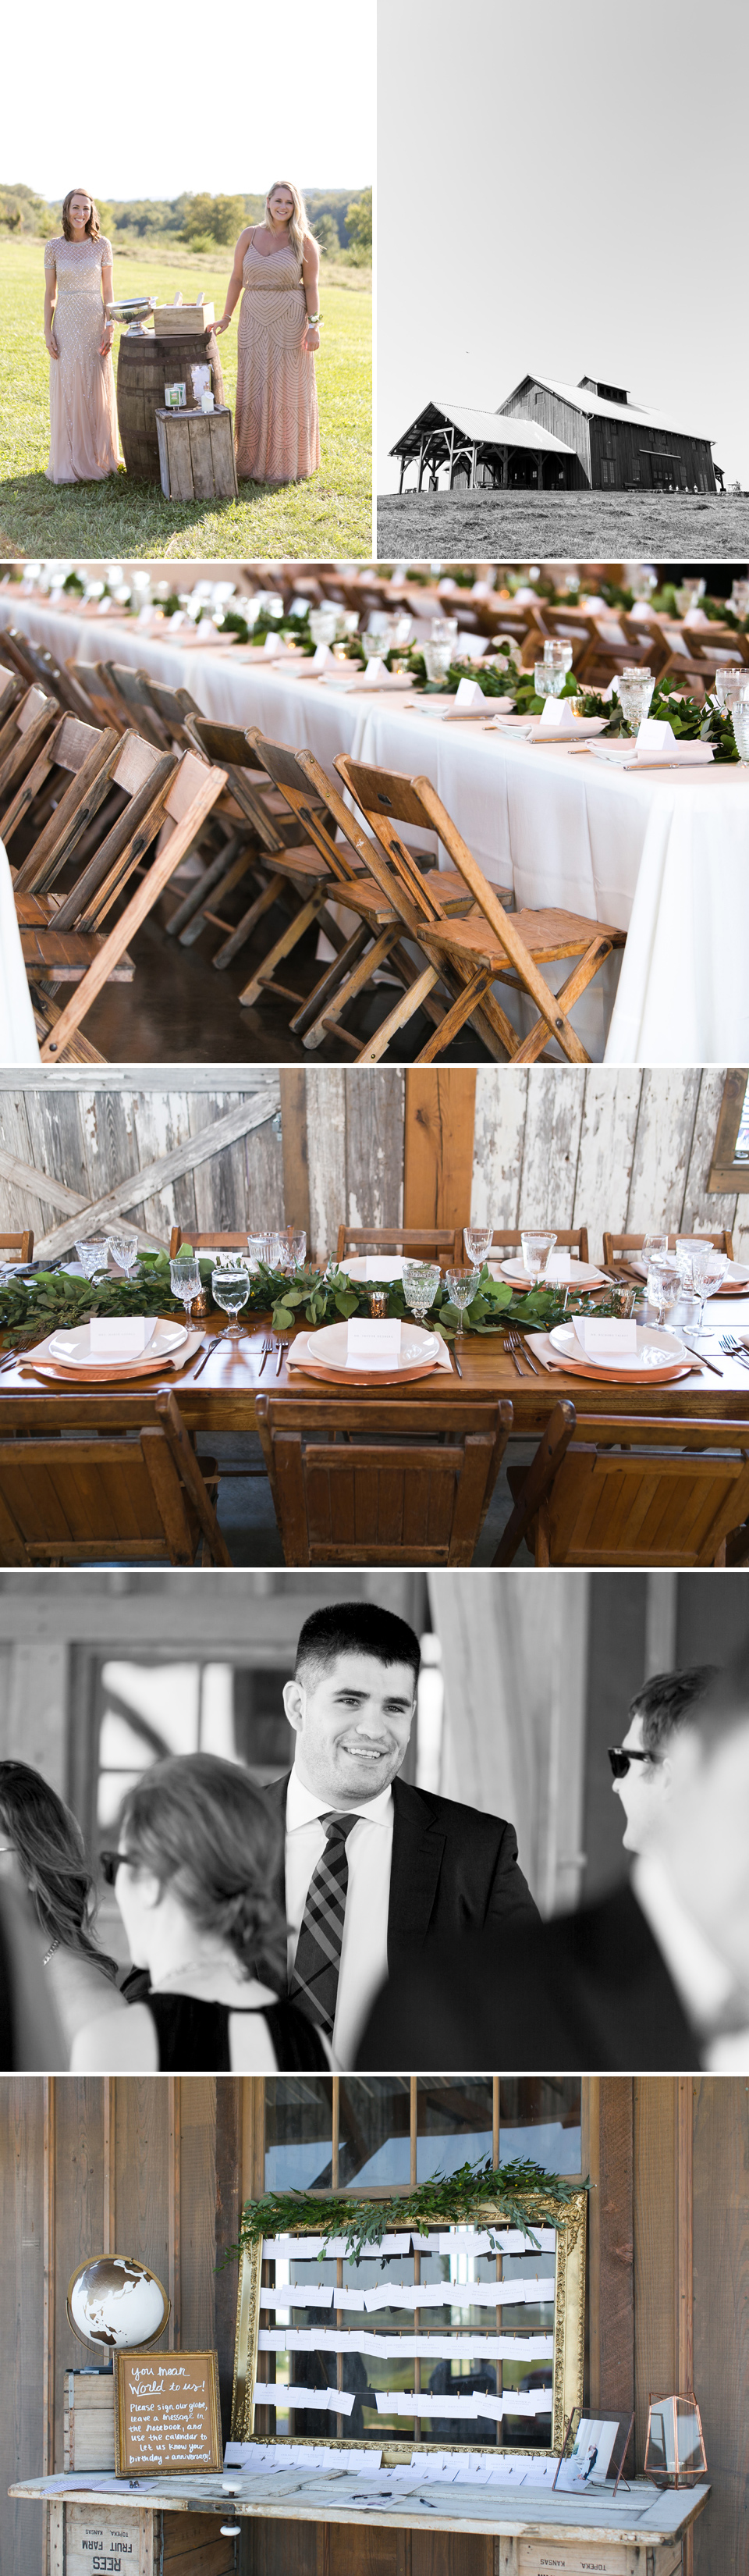 Barn wedding, Blush Spa and Shannon Nemec, Good Earth Floral, Hello Lovely, jana marie photography, Kincaid Transportation, Madison Sanders Events, Natasha's Mullberry and Mott, Pech Limousine, Salt Catering, Something White Bridal, The Lost Wax, Timber Barn, Top Shelf Bartending, Ultrapom Event Rental, Weston Red Barn Farm, Jana Marie Photography